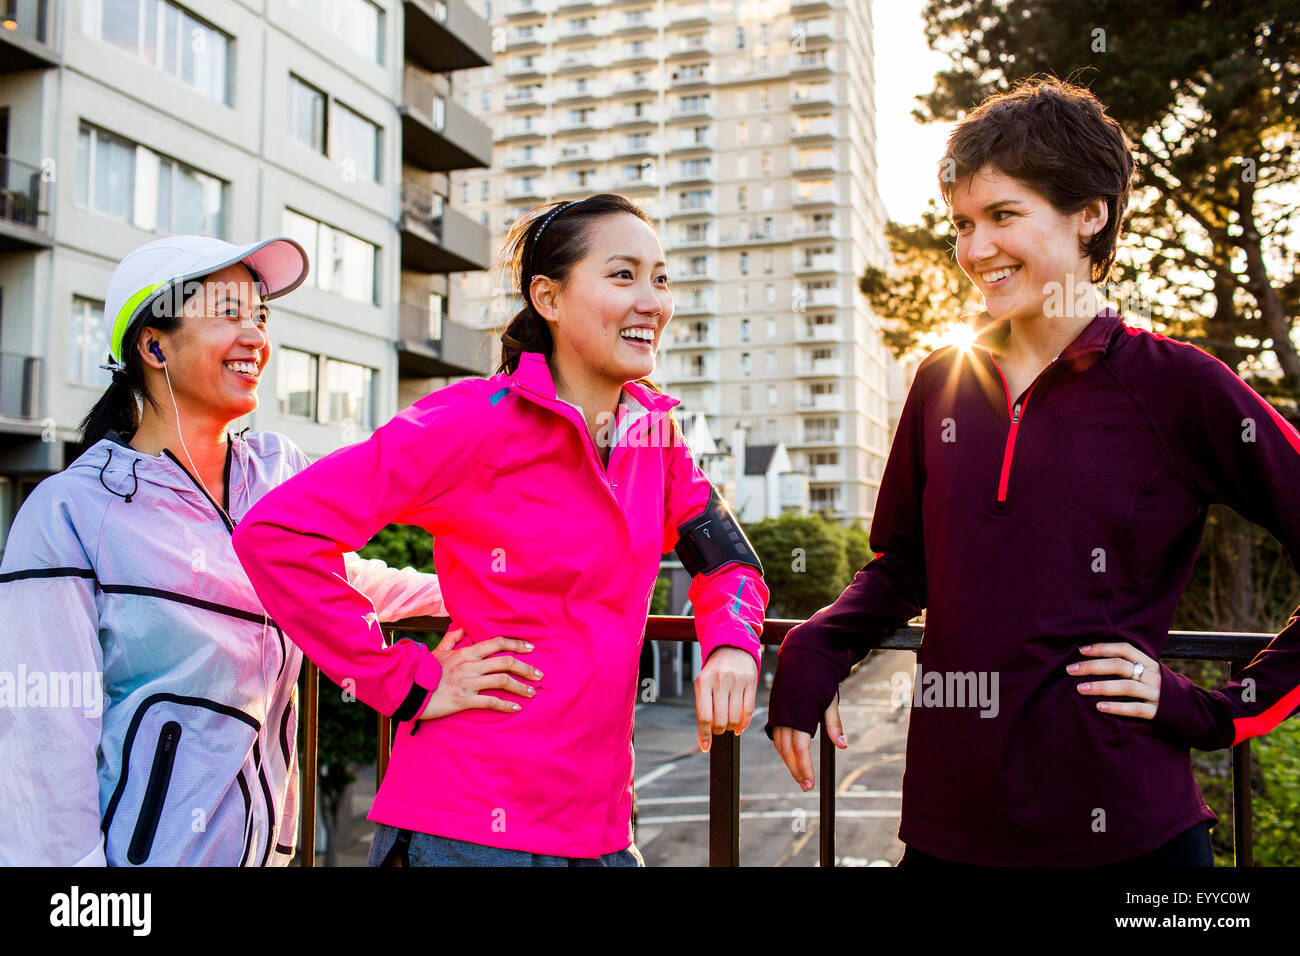 Runners talking in city Stock Photo